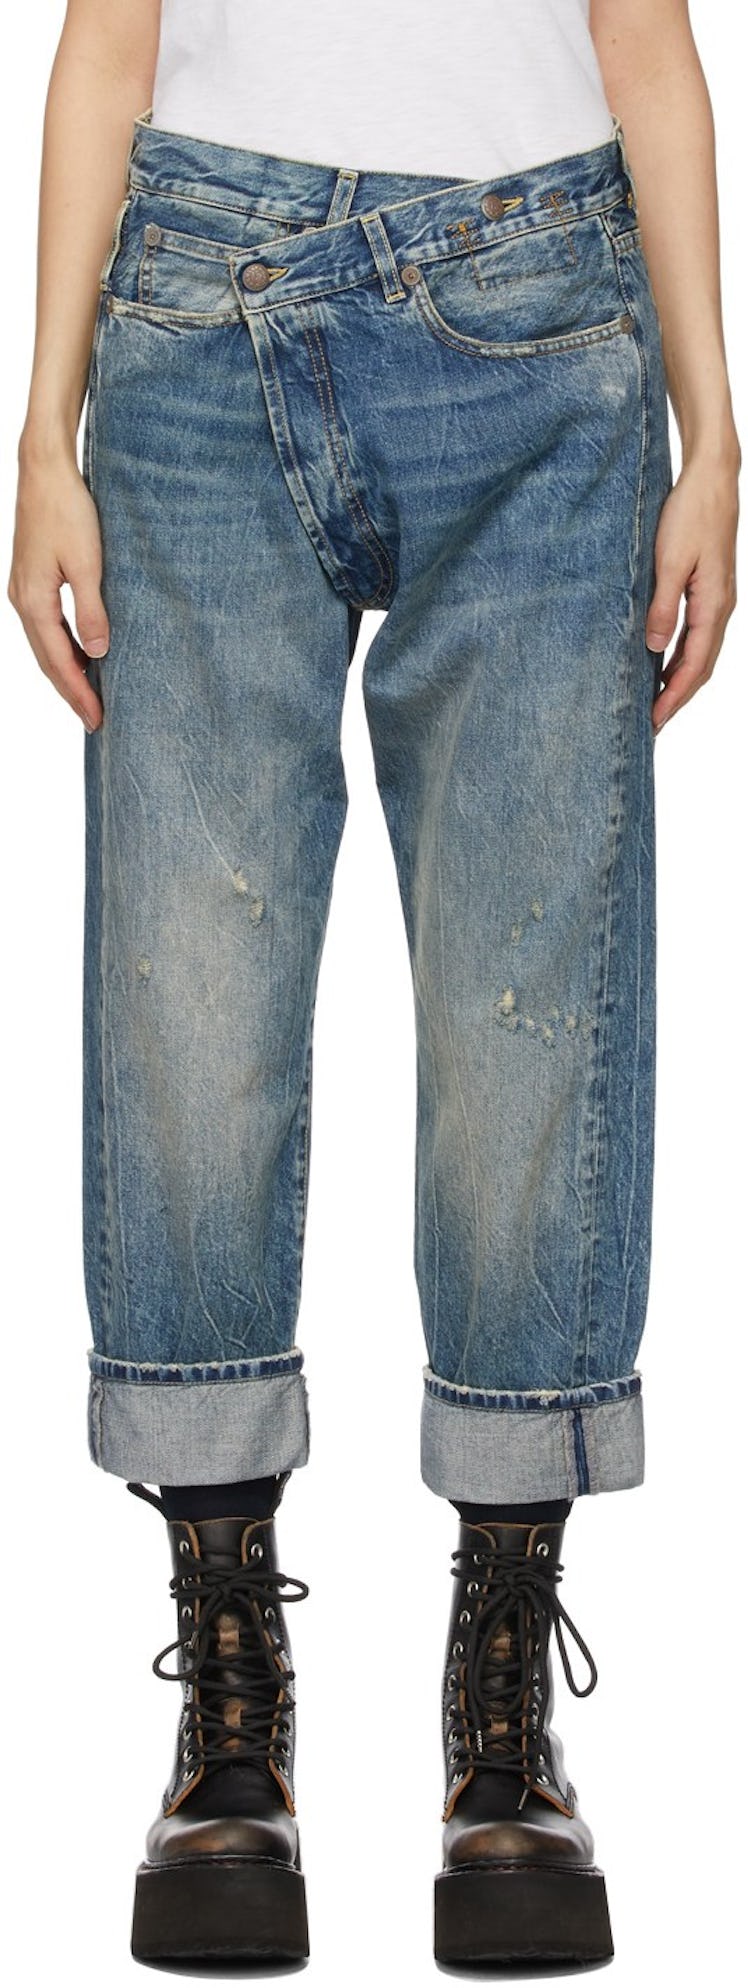 Blue Cross-Over Jeans from R13, available to shop via SSENSE.